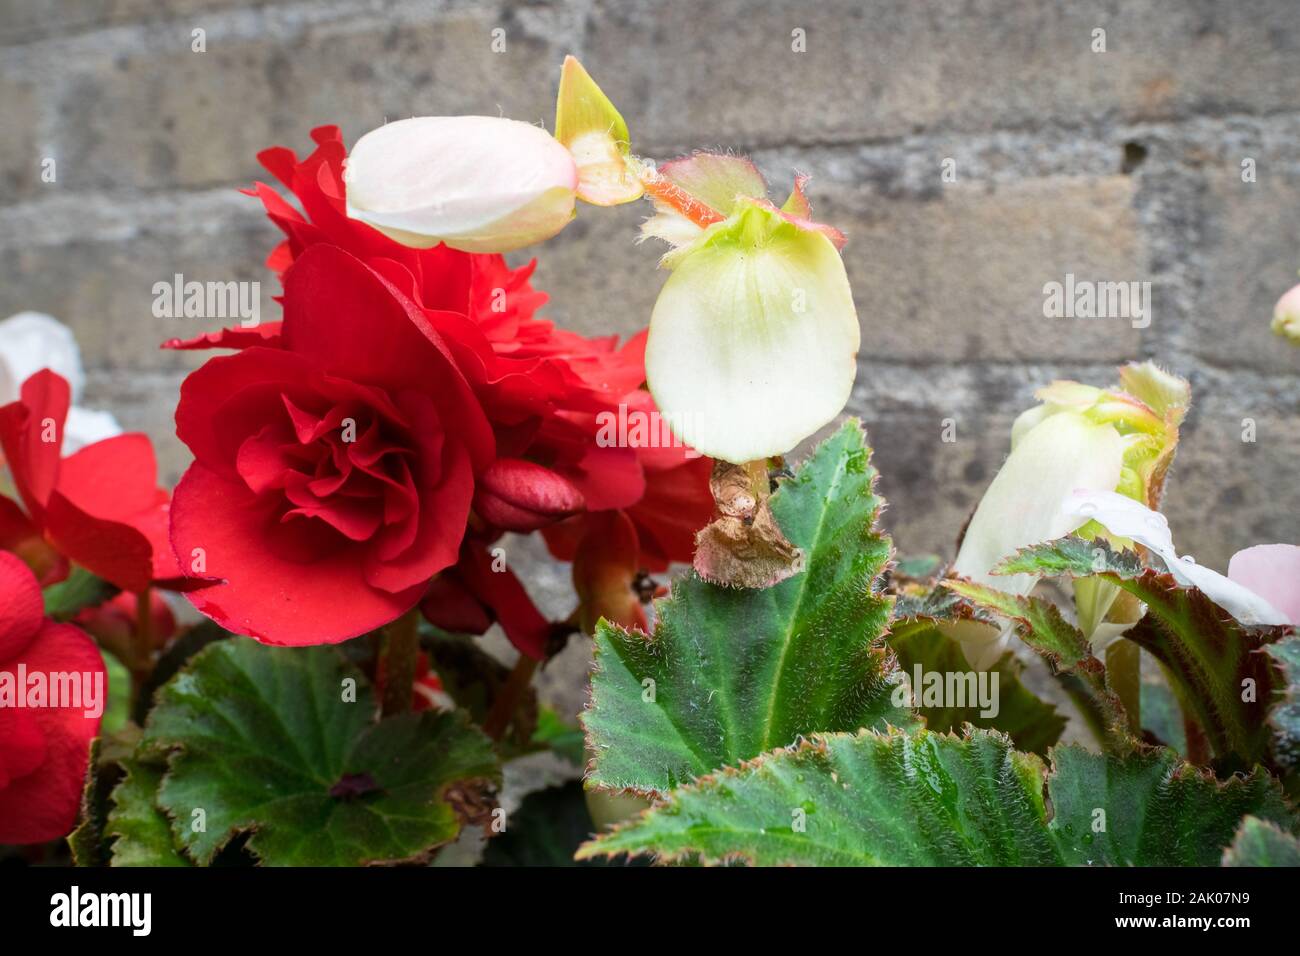 White and red colored double flowered Begonia in an urban garden Stock Photo